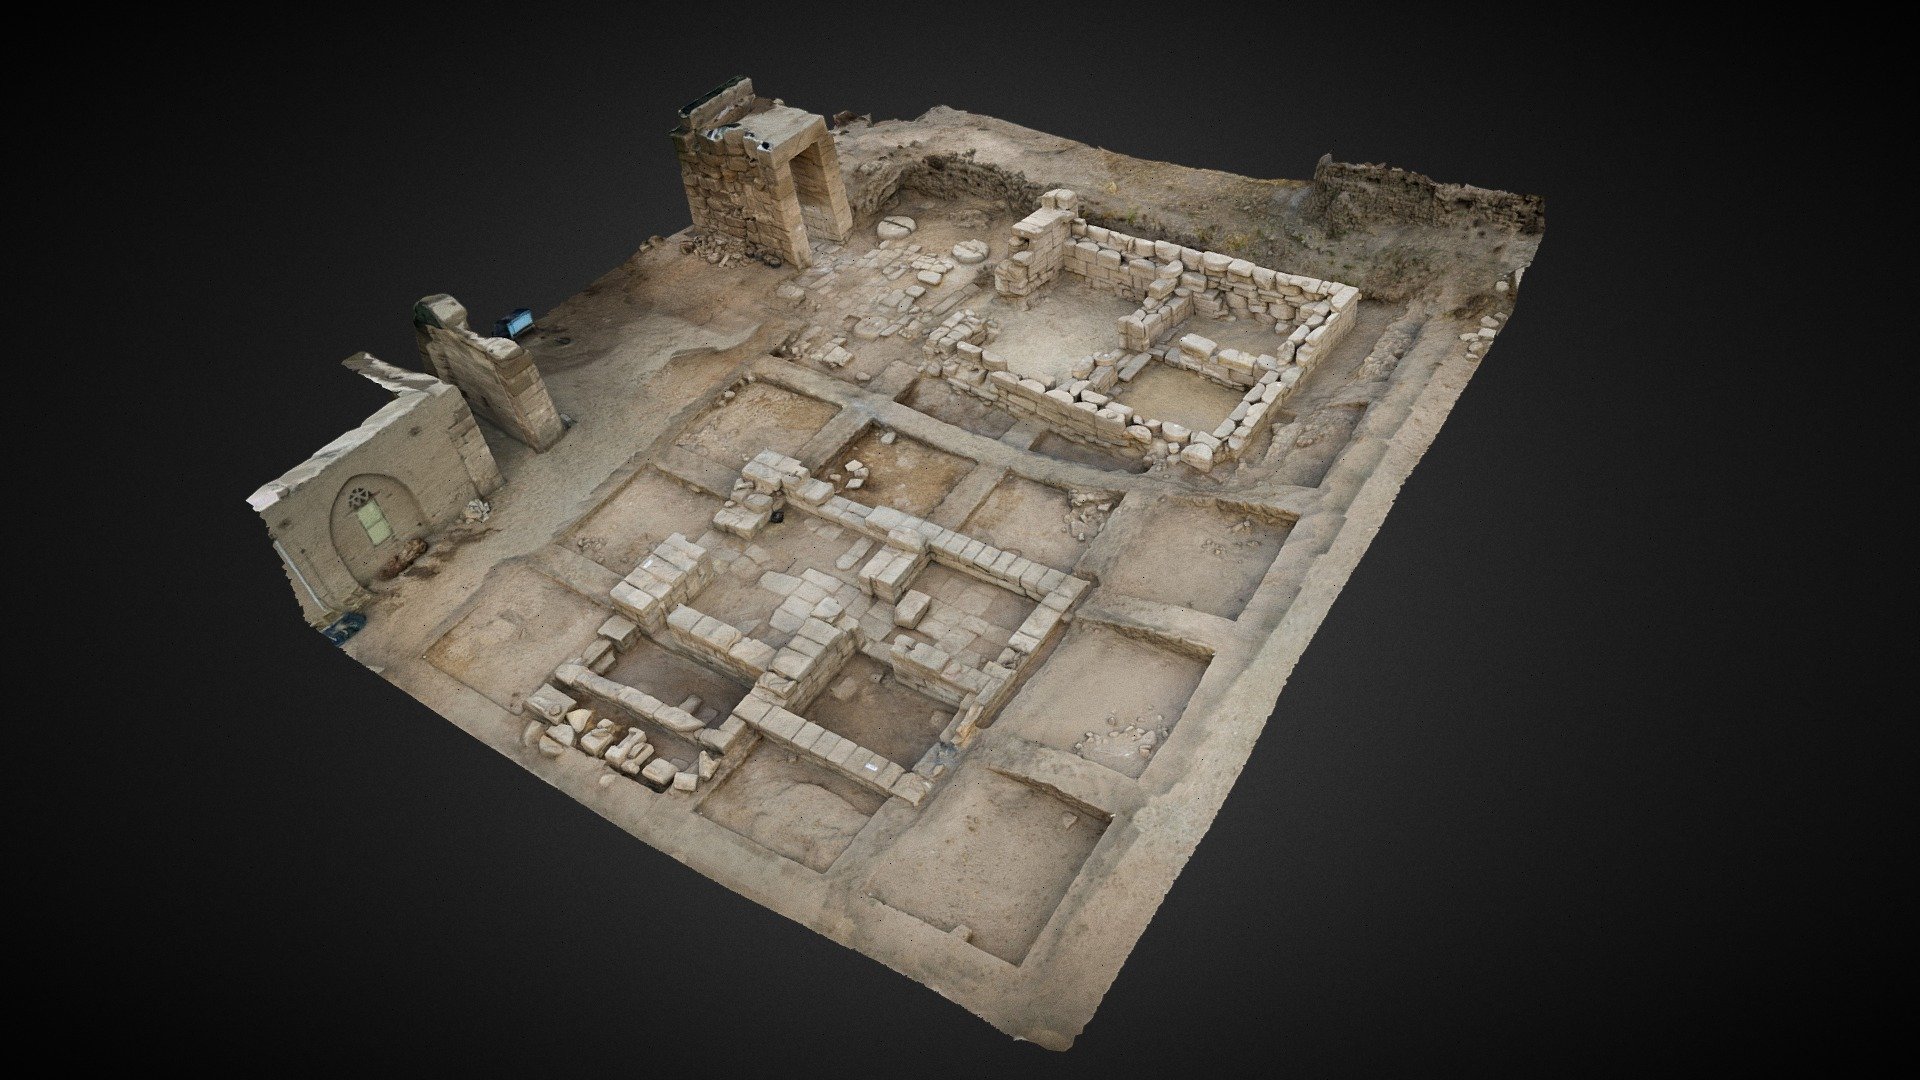 The Egyptian-Chinese joint mission at Munto Temple, North Karnak
Documentation stage before the conservation and restoration process

Photogrammetry 3D model generated using AGIsoft Metashape from 1800 images, Sony a7 with Sony 24 mm f/4. 10/1/2019



Six doors in the south wall of the Montu precinct lead to six chapels dedicated by Divine Votaresses of Amen to different forms of Osiris. From west to east they are: (a) chapel of Nitocris (Psamtik I); (b) Amenirdis (Shabako or Shabataka); (c) and (d) unattributed; (e) Karomama (Takelot II); (f) reign of Taharka. These chapels may not have been included in the precinct until the girdle wall was built under Nectanebo I and II, as there are other chapels of the same type outside of the precinc

« The Montu Precinct at North-Karnak » in K.A. Bard éd. Encyclopedia of the Archaeology of Ancient Egypt
 - Two of the Osirian chapels, Karnak North - 3D model by Ibrahim Mustafa Ibrahim (@imhotep25) 3d model